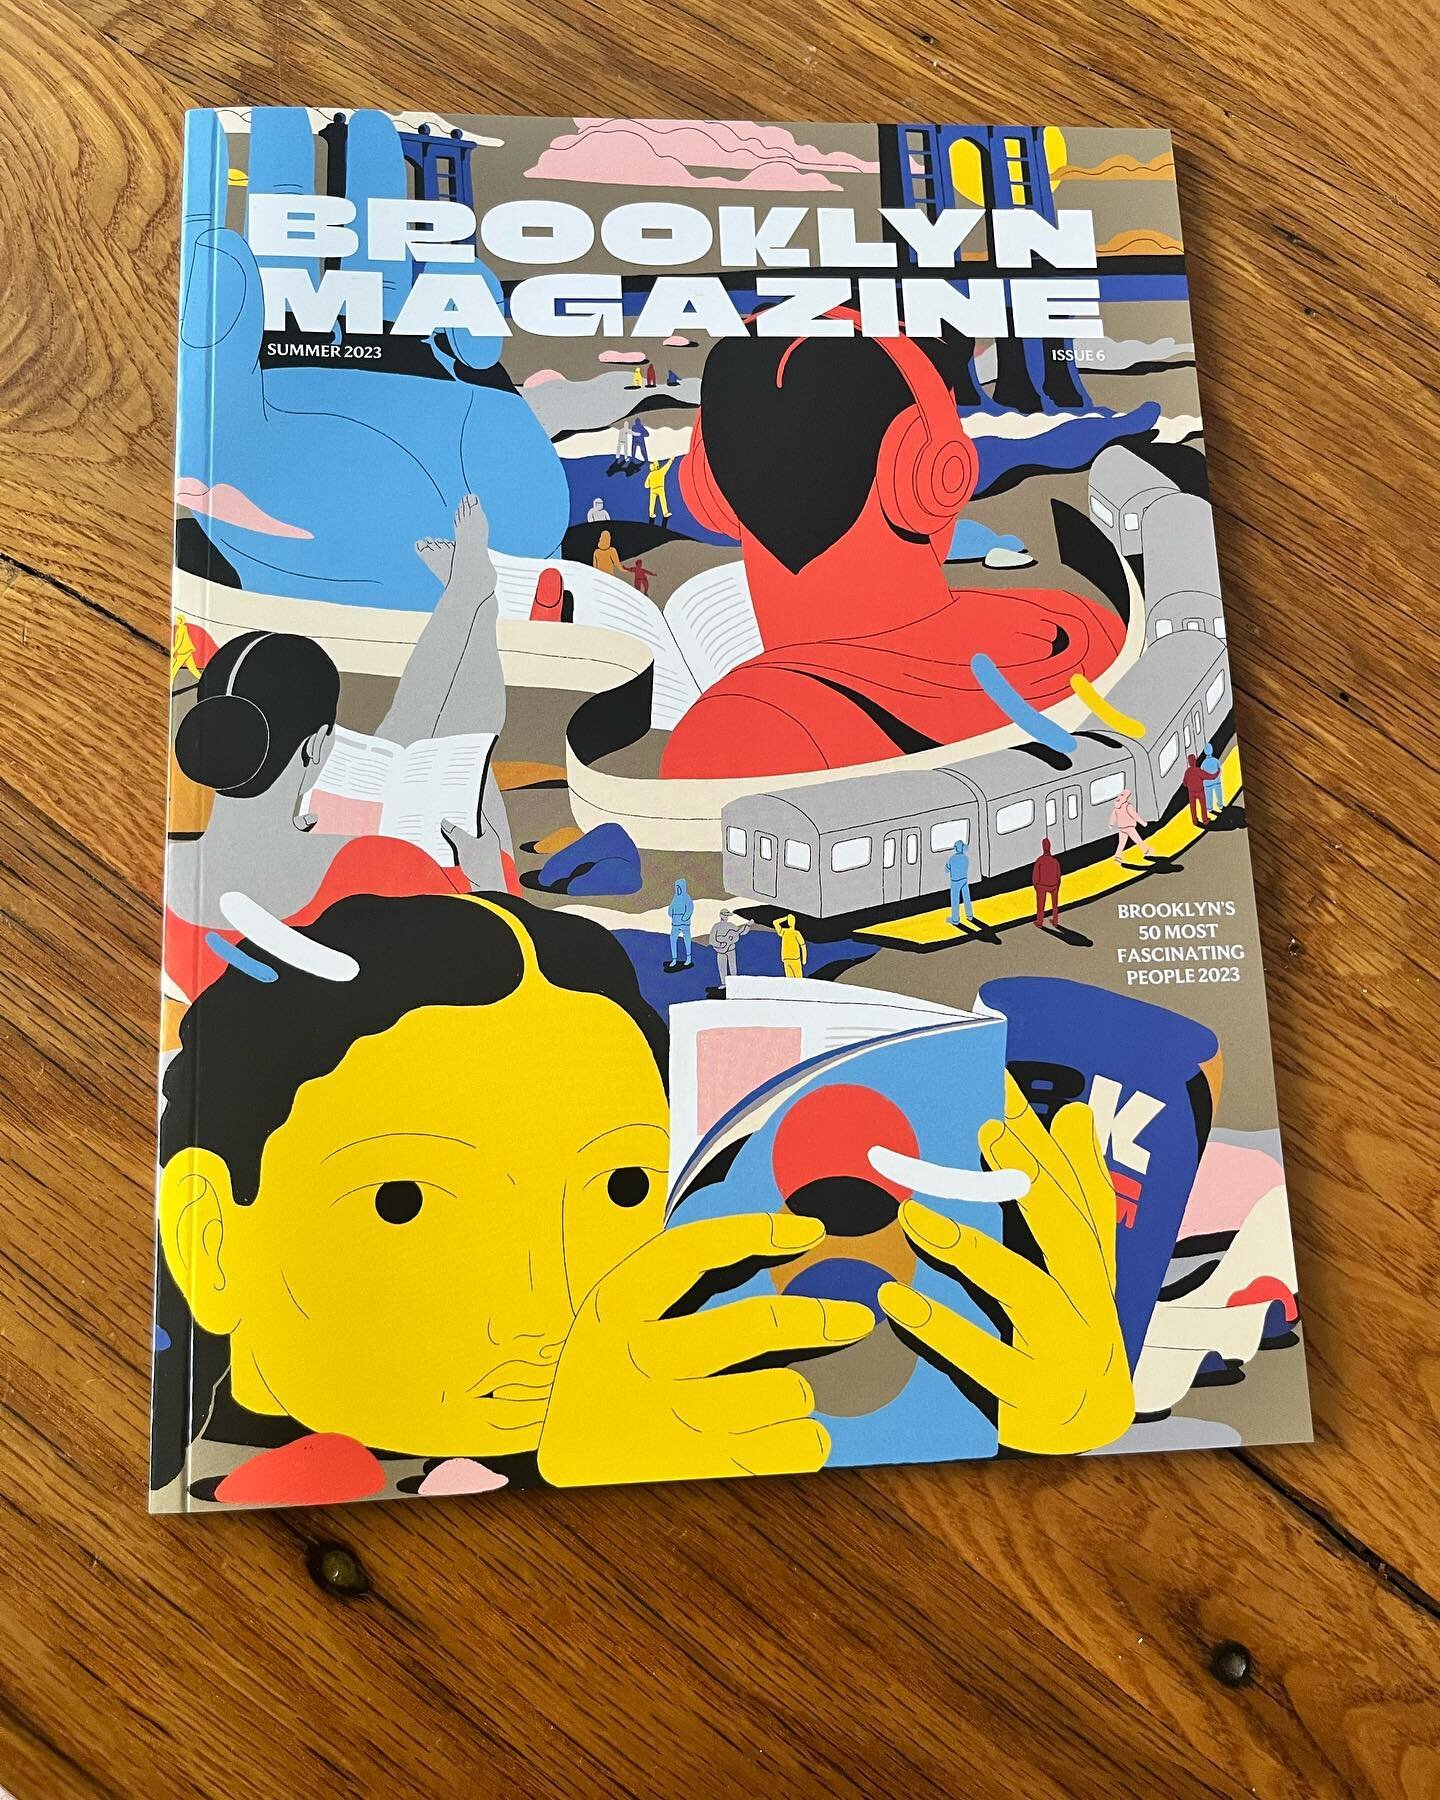 Thanks @brooklynmagazine for including us on your BK50 list among so many incredible folks✨